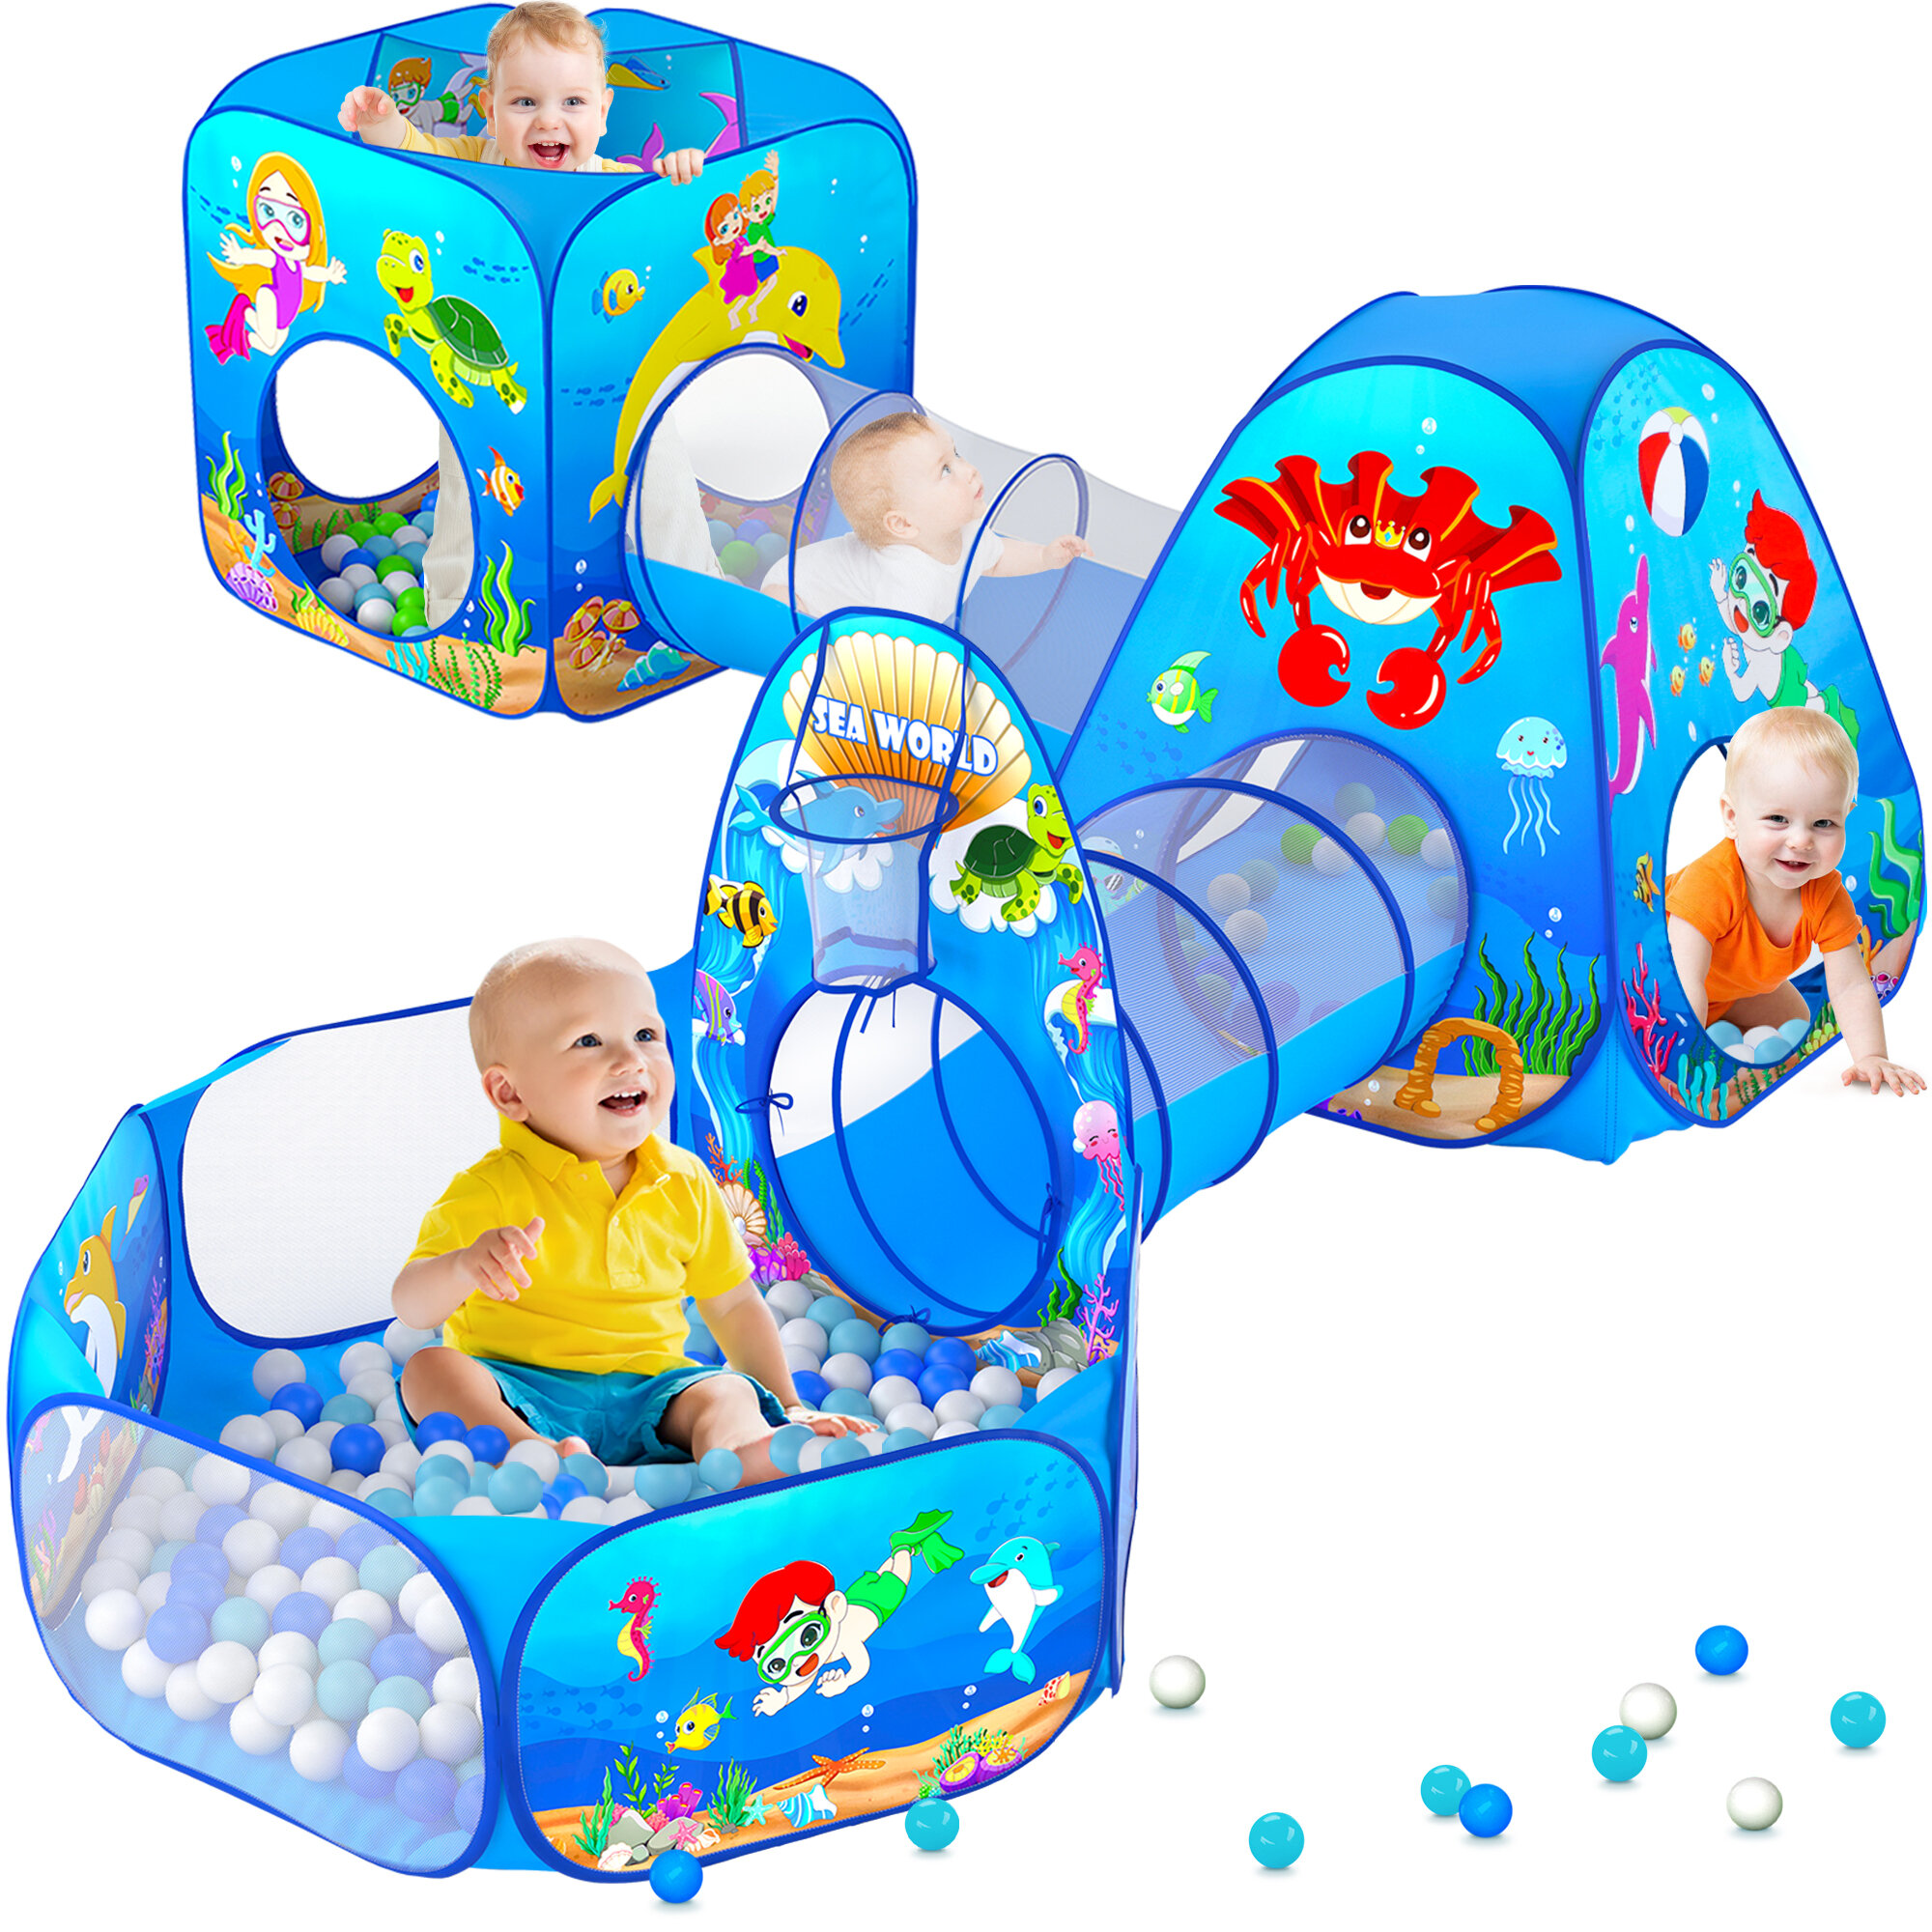 Ball Pit Pool & Tube Tunnel Playhouse 3-in-1 Kids Pop Up Adventure Play Tent 